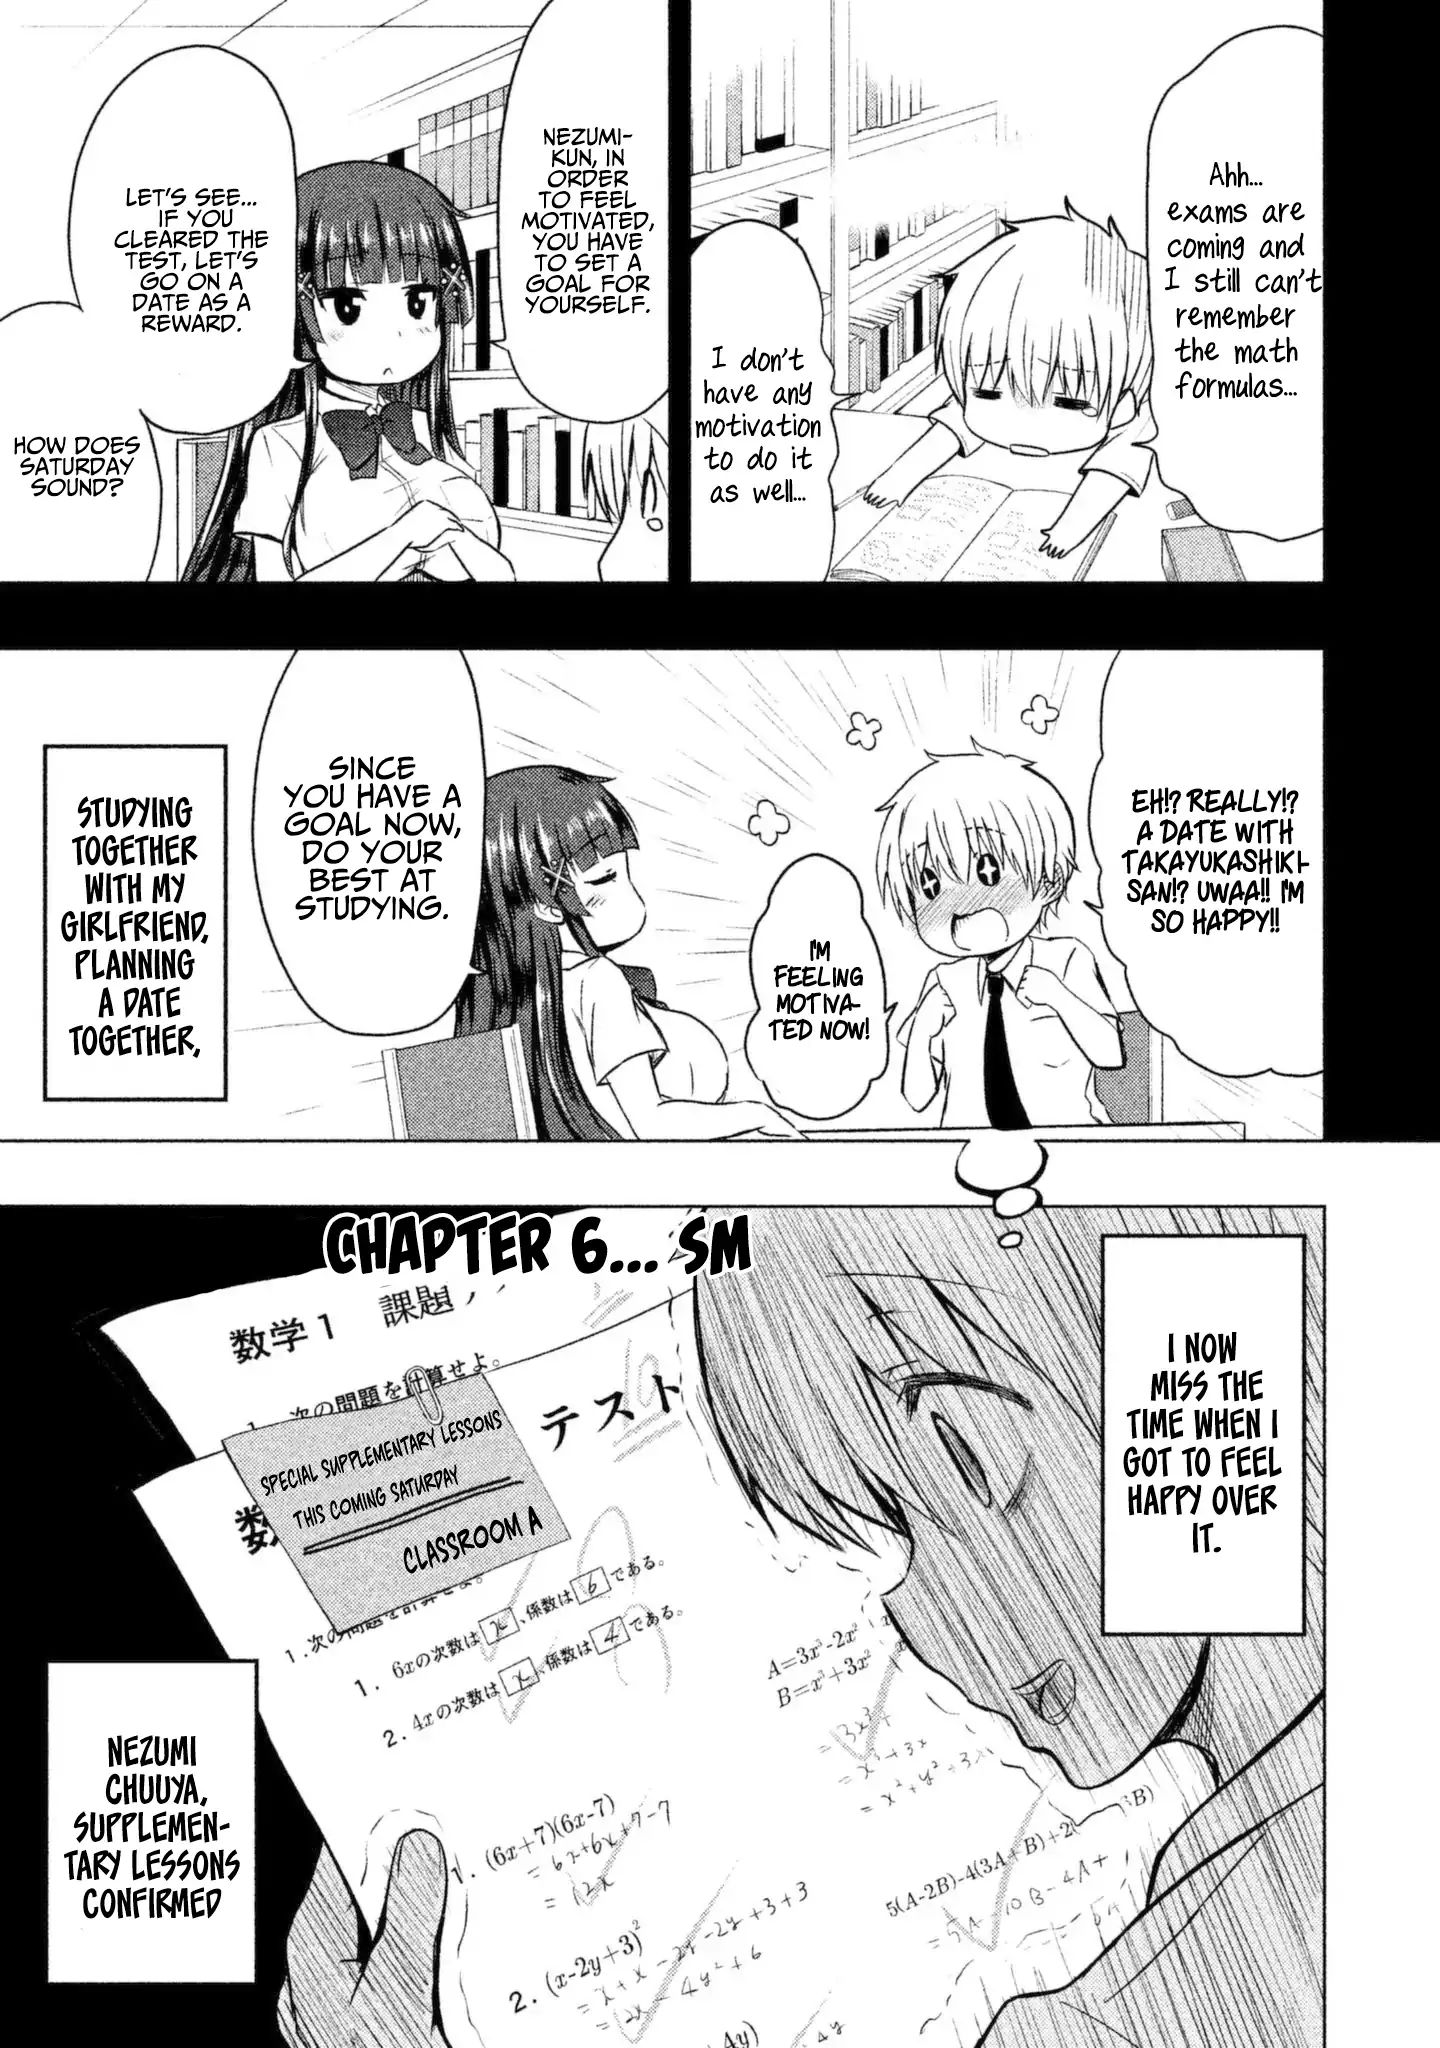 A Girl Who Is Very Well-Informed About Weird Knowledge, Takayukashiki Souko-San Chapter 6 #2